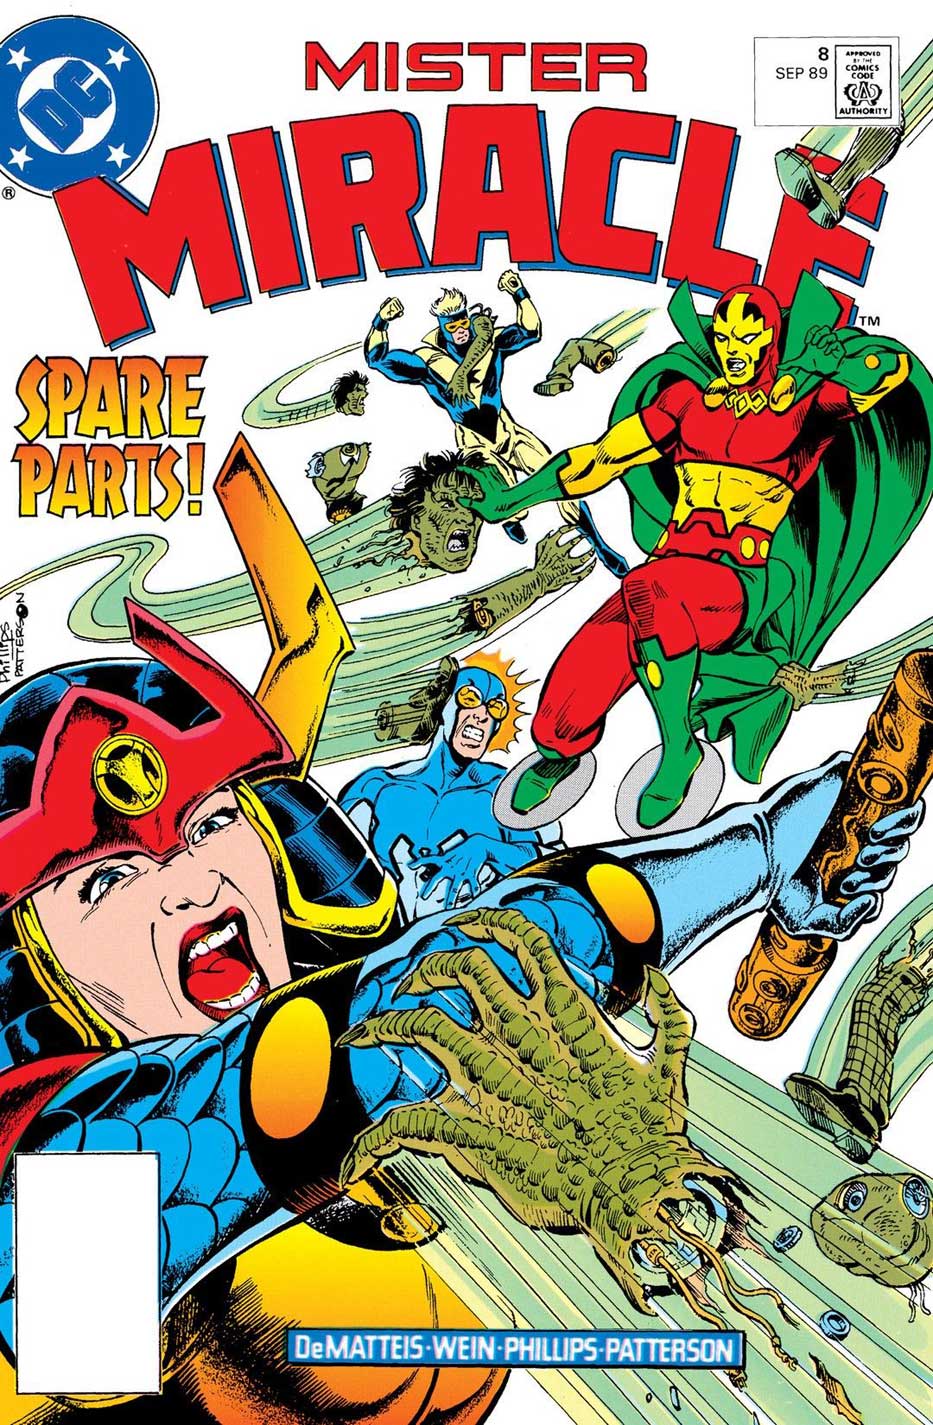 Mister Miracle #8 - Plot by J. M. DeMatteis, Script by Len Wein, art by Joe Phillips and Pablo Marcos